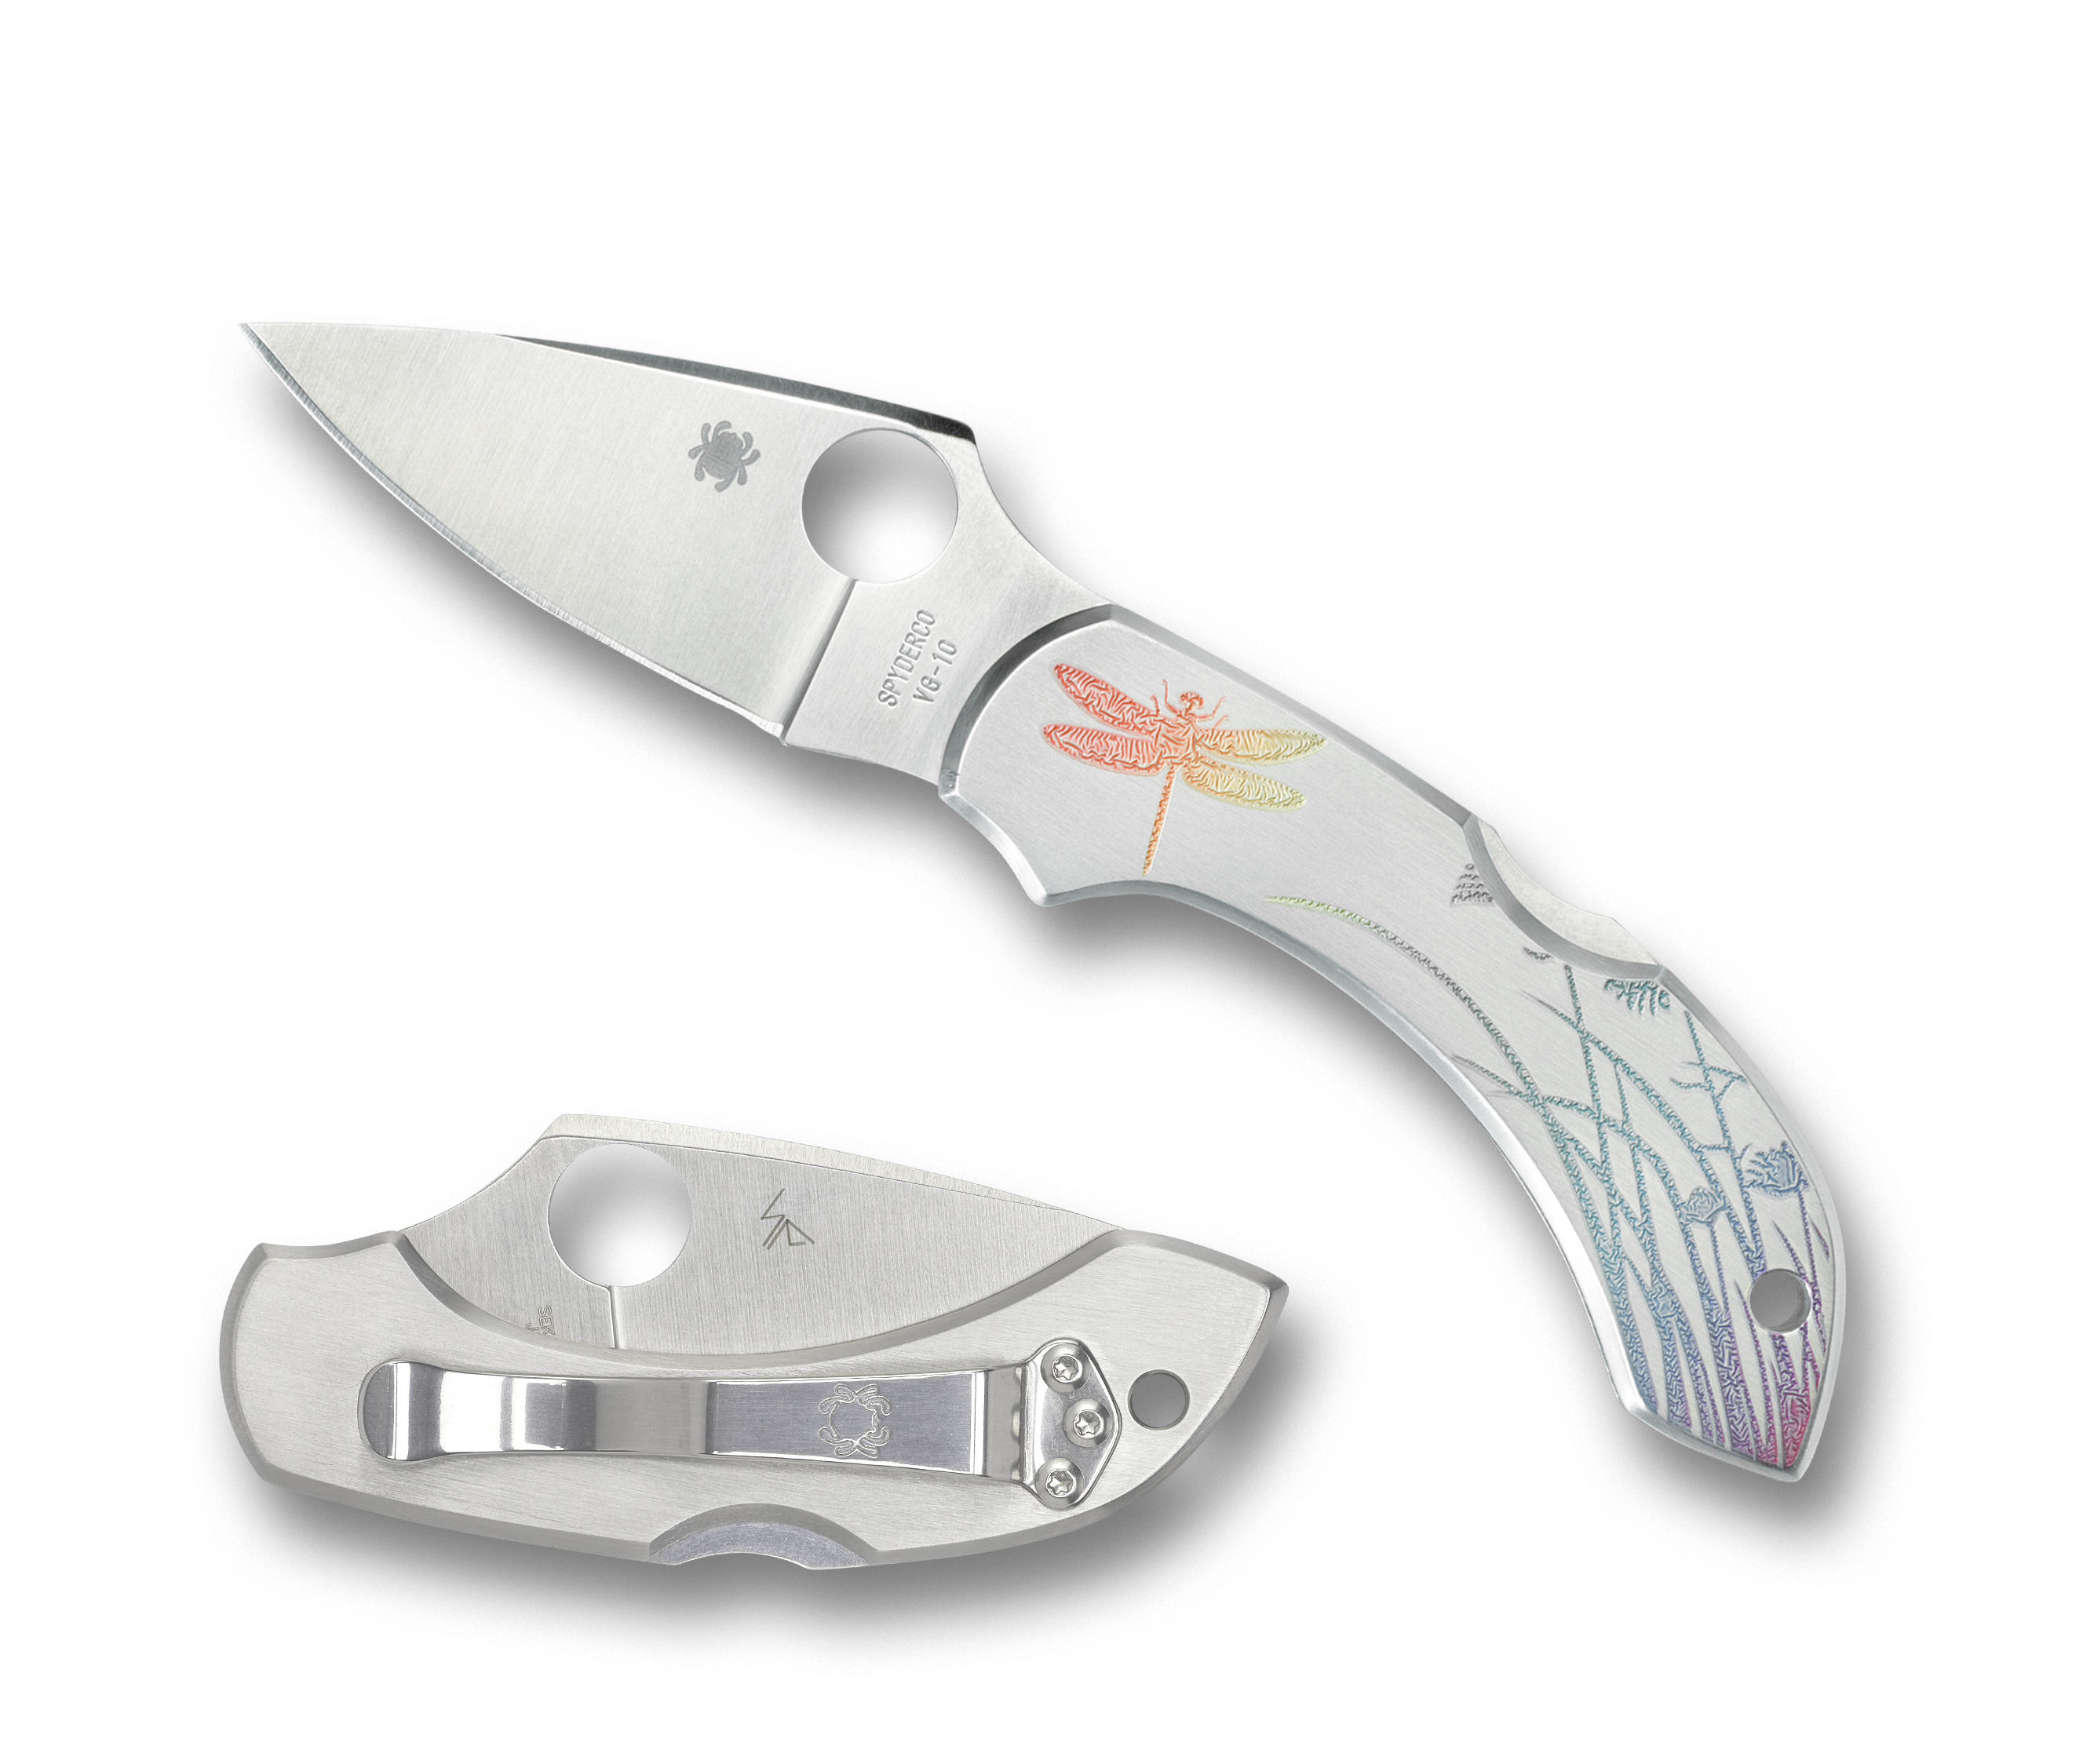 Spyderco Dragonfly - Stainless Steel Tattoo - C28PT